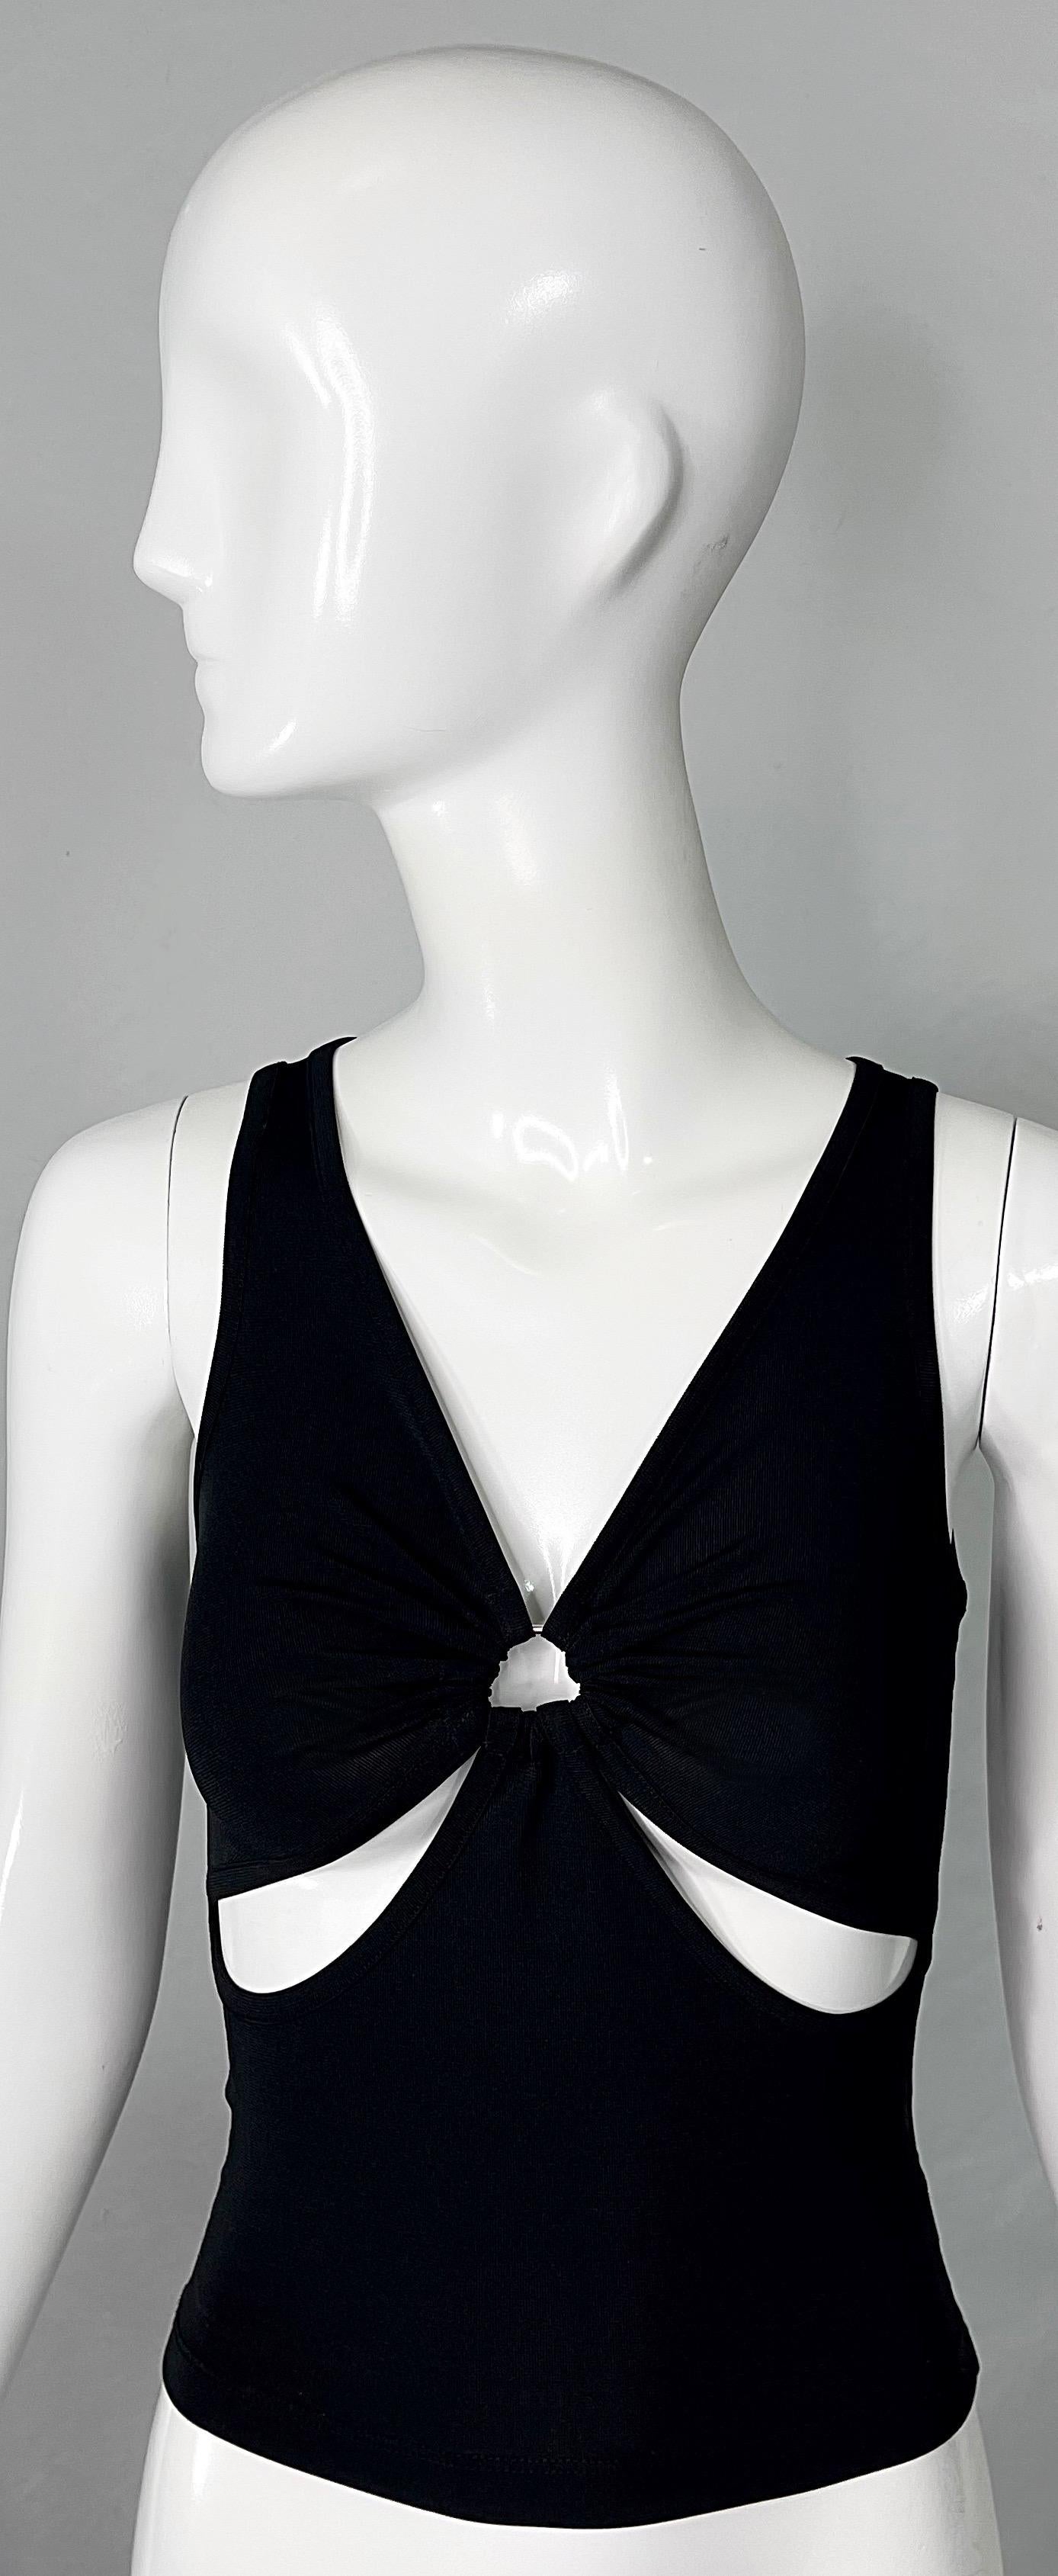 Rare sexy early Y2K 2000s GIANNI VERSACE Jeans Couture black rayon cut - out sleeveless top ! This shirt features the softest black rayon jersey, with plenty of stretch. Simply slips over the head. Cut-out details at center bust and below the bust.